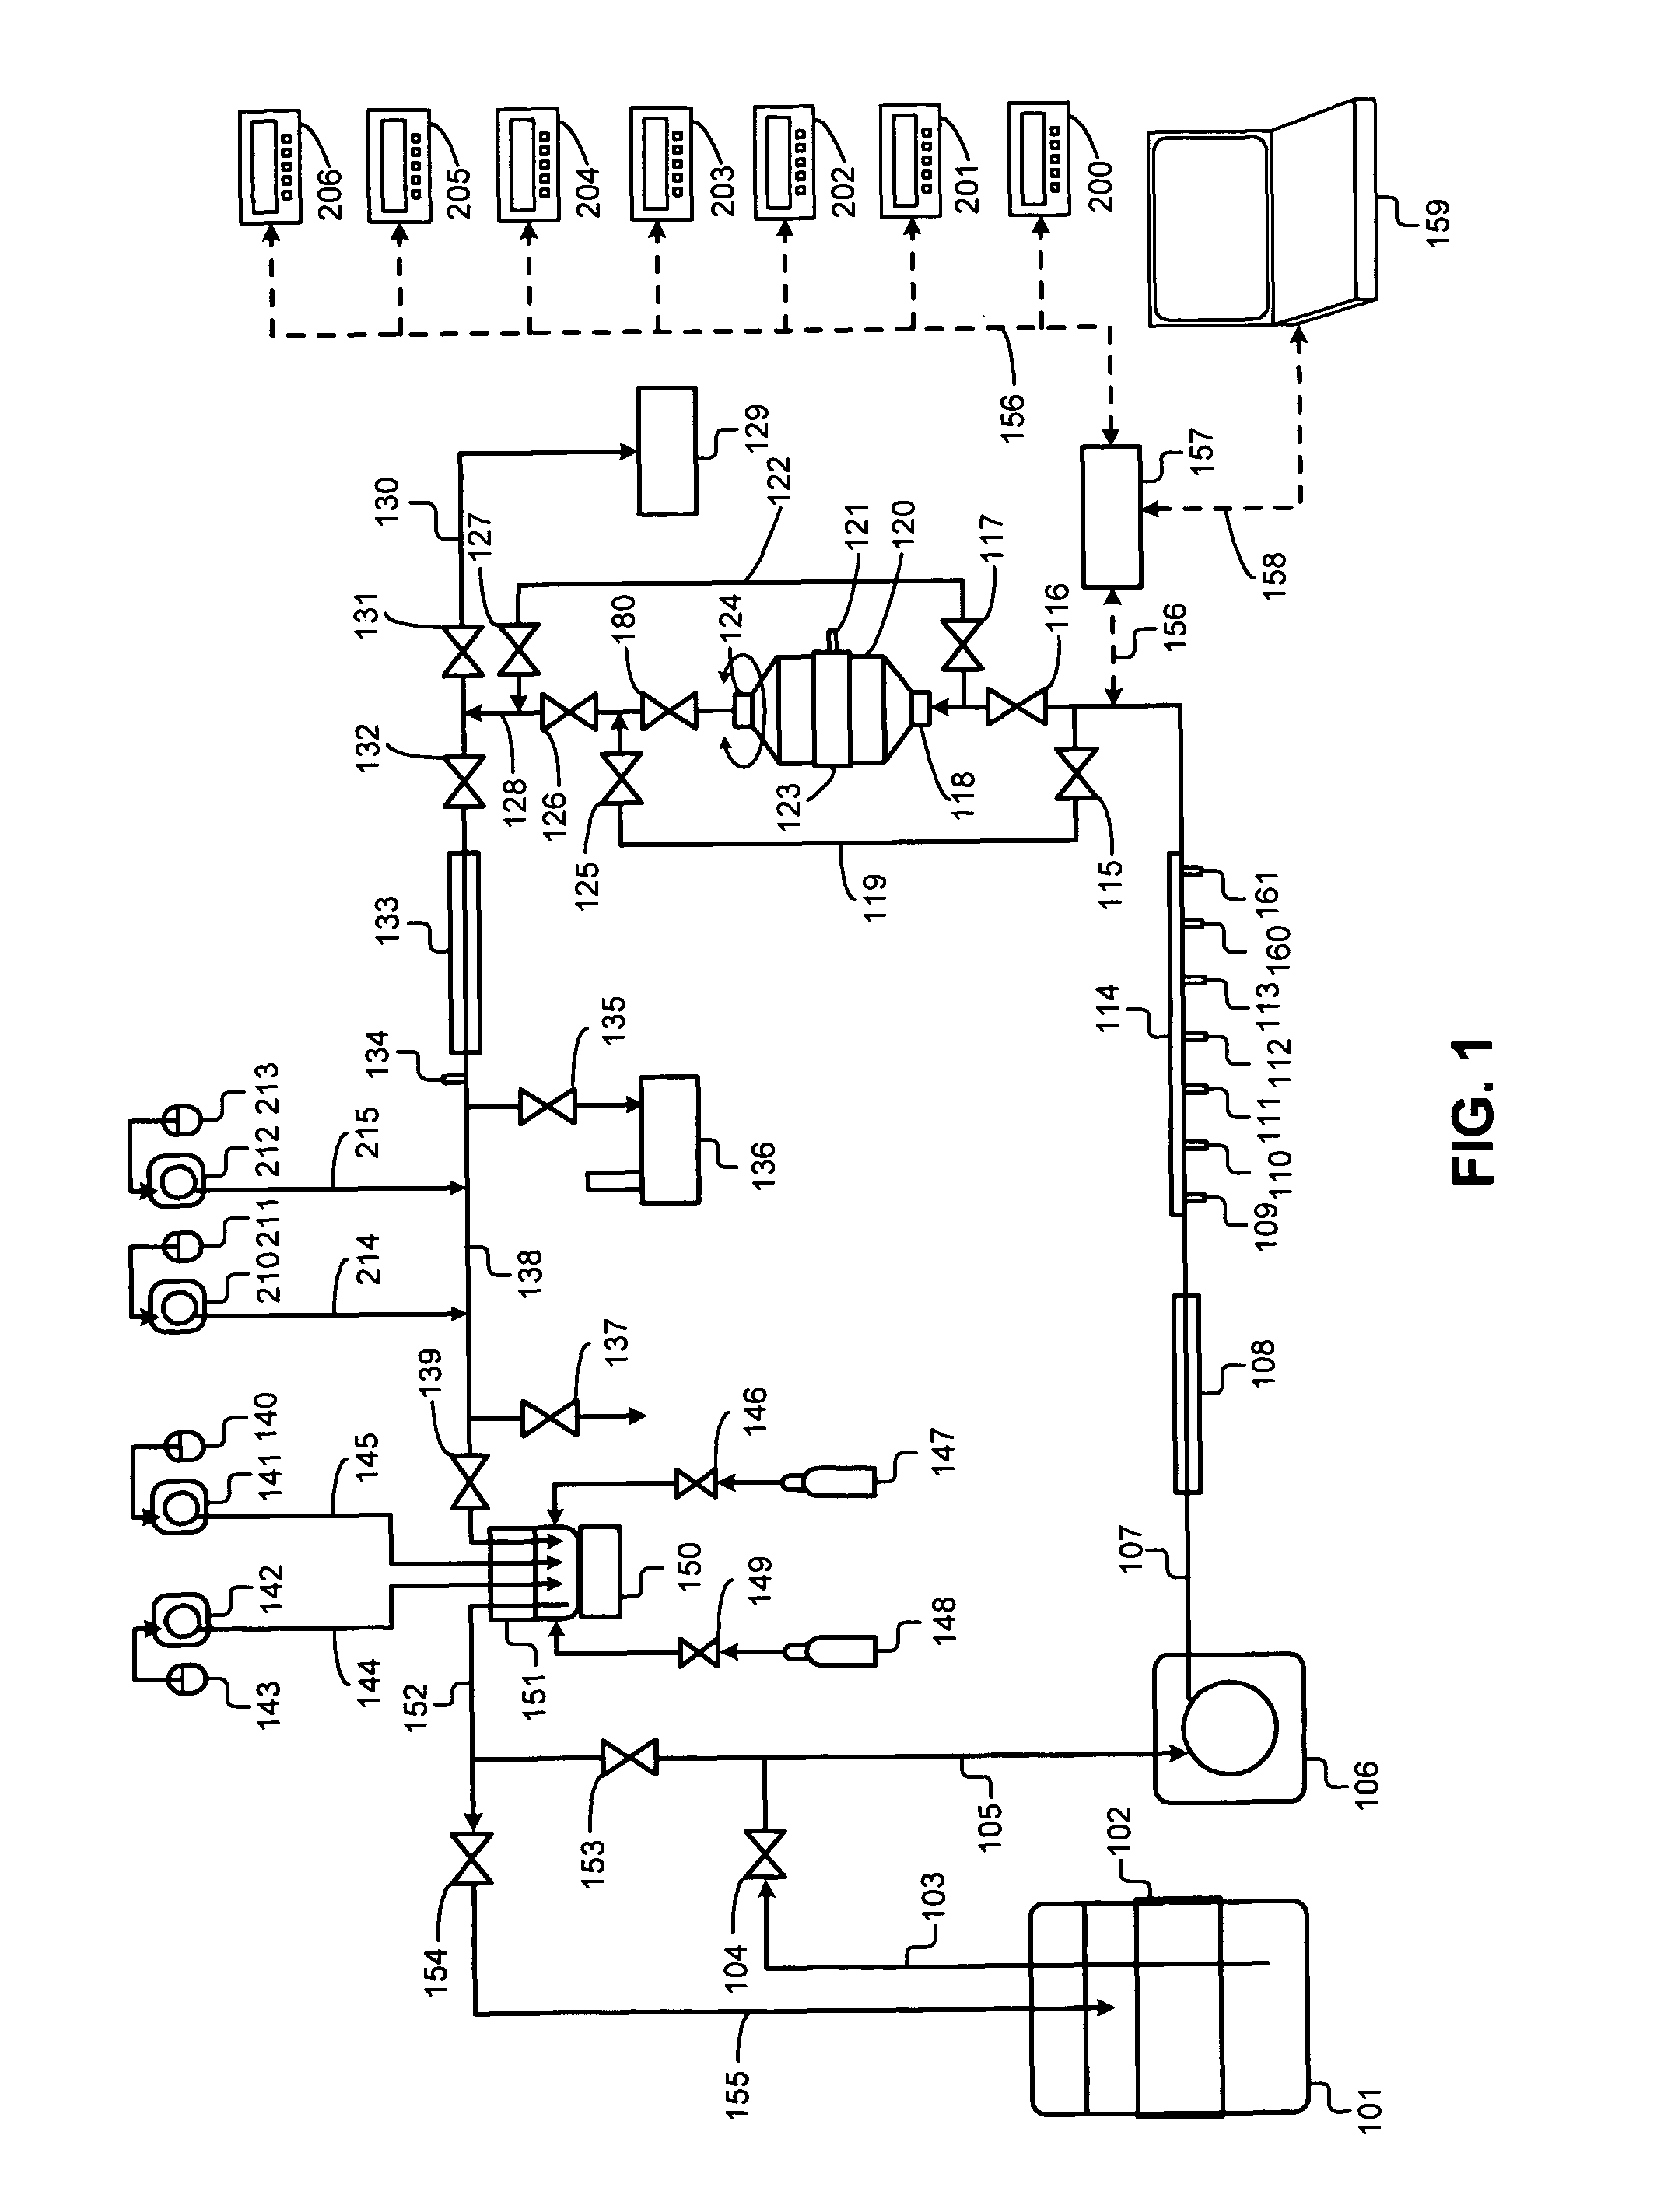 Automated apparatus for pancreatic islet isolation and processing